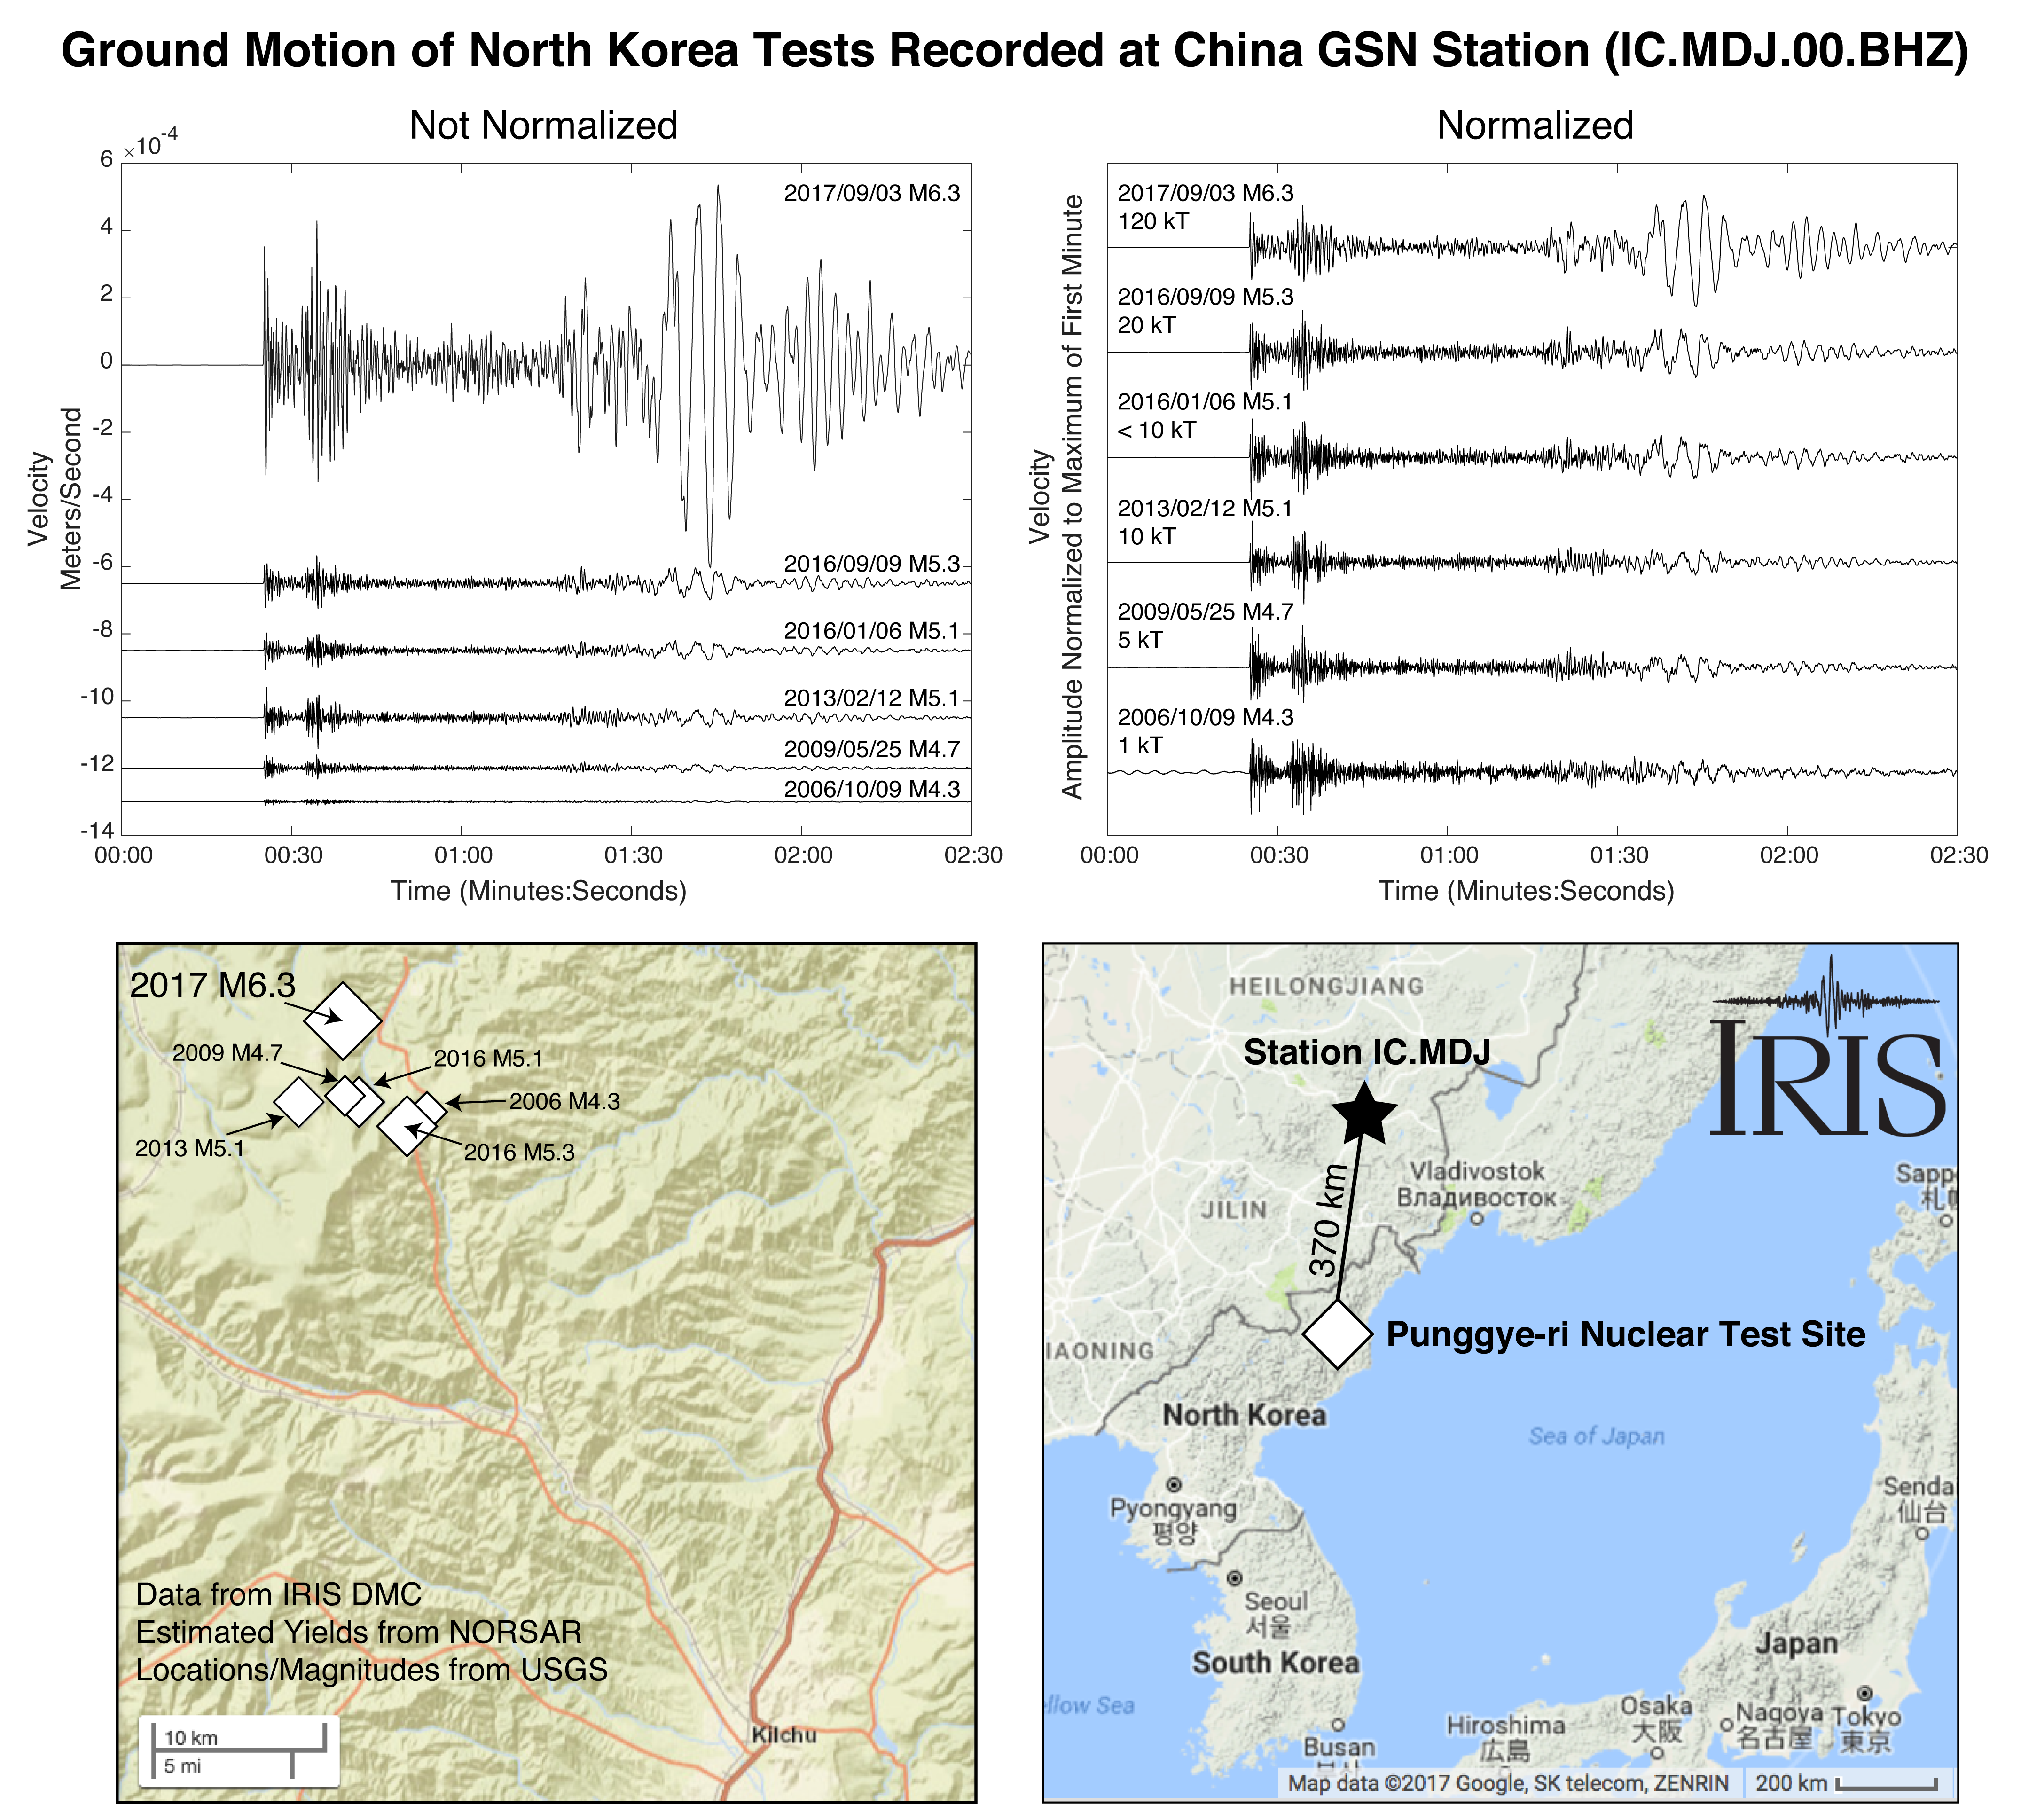 Comparison plot of the six most recent and largest North Korea tests